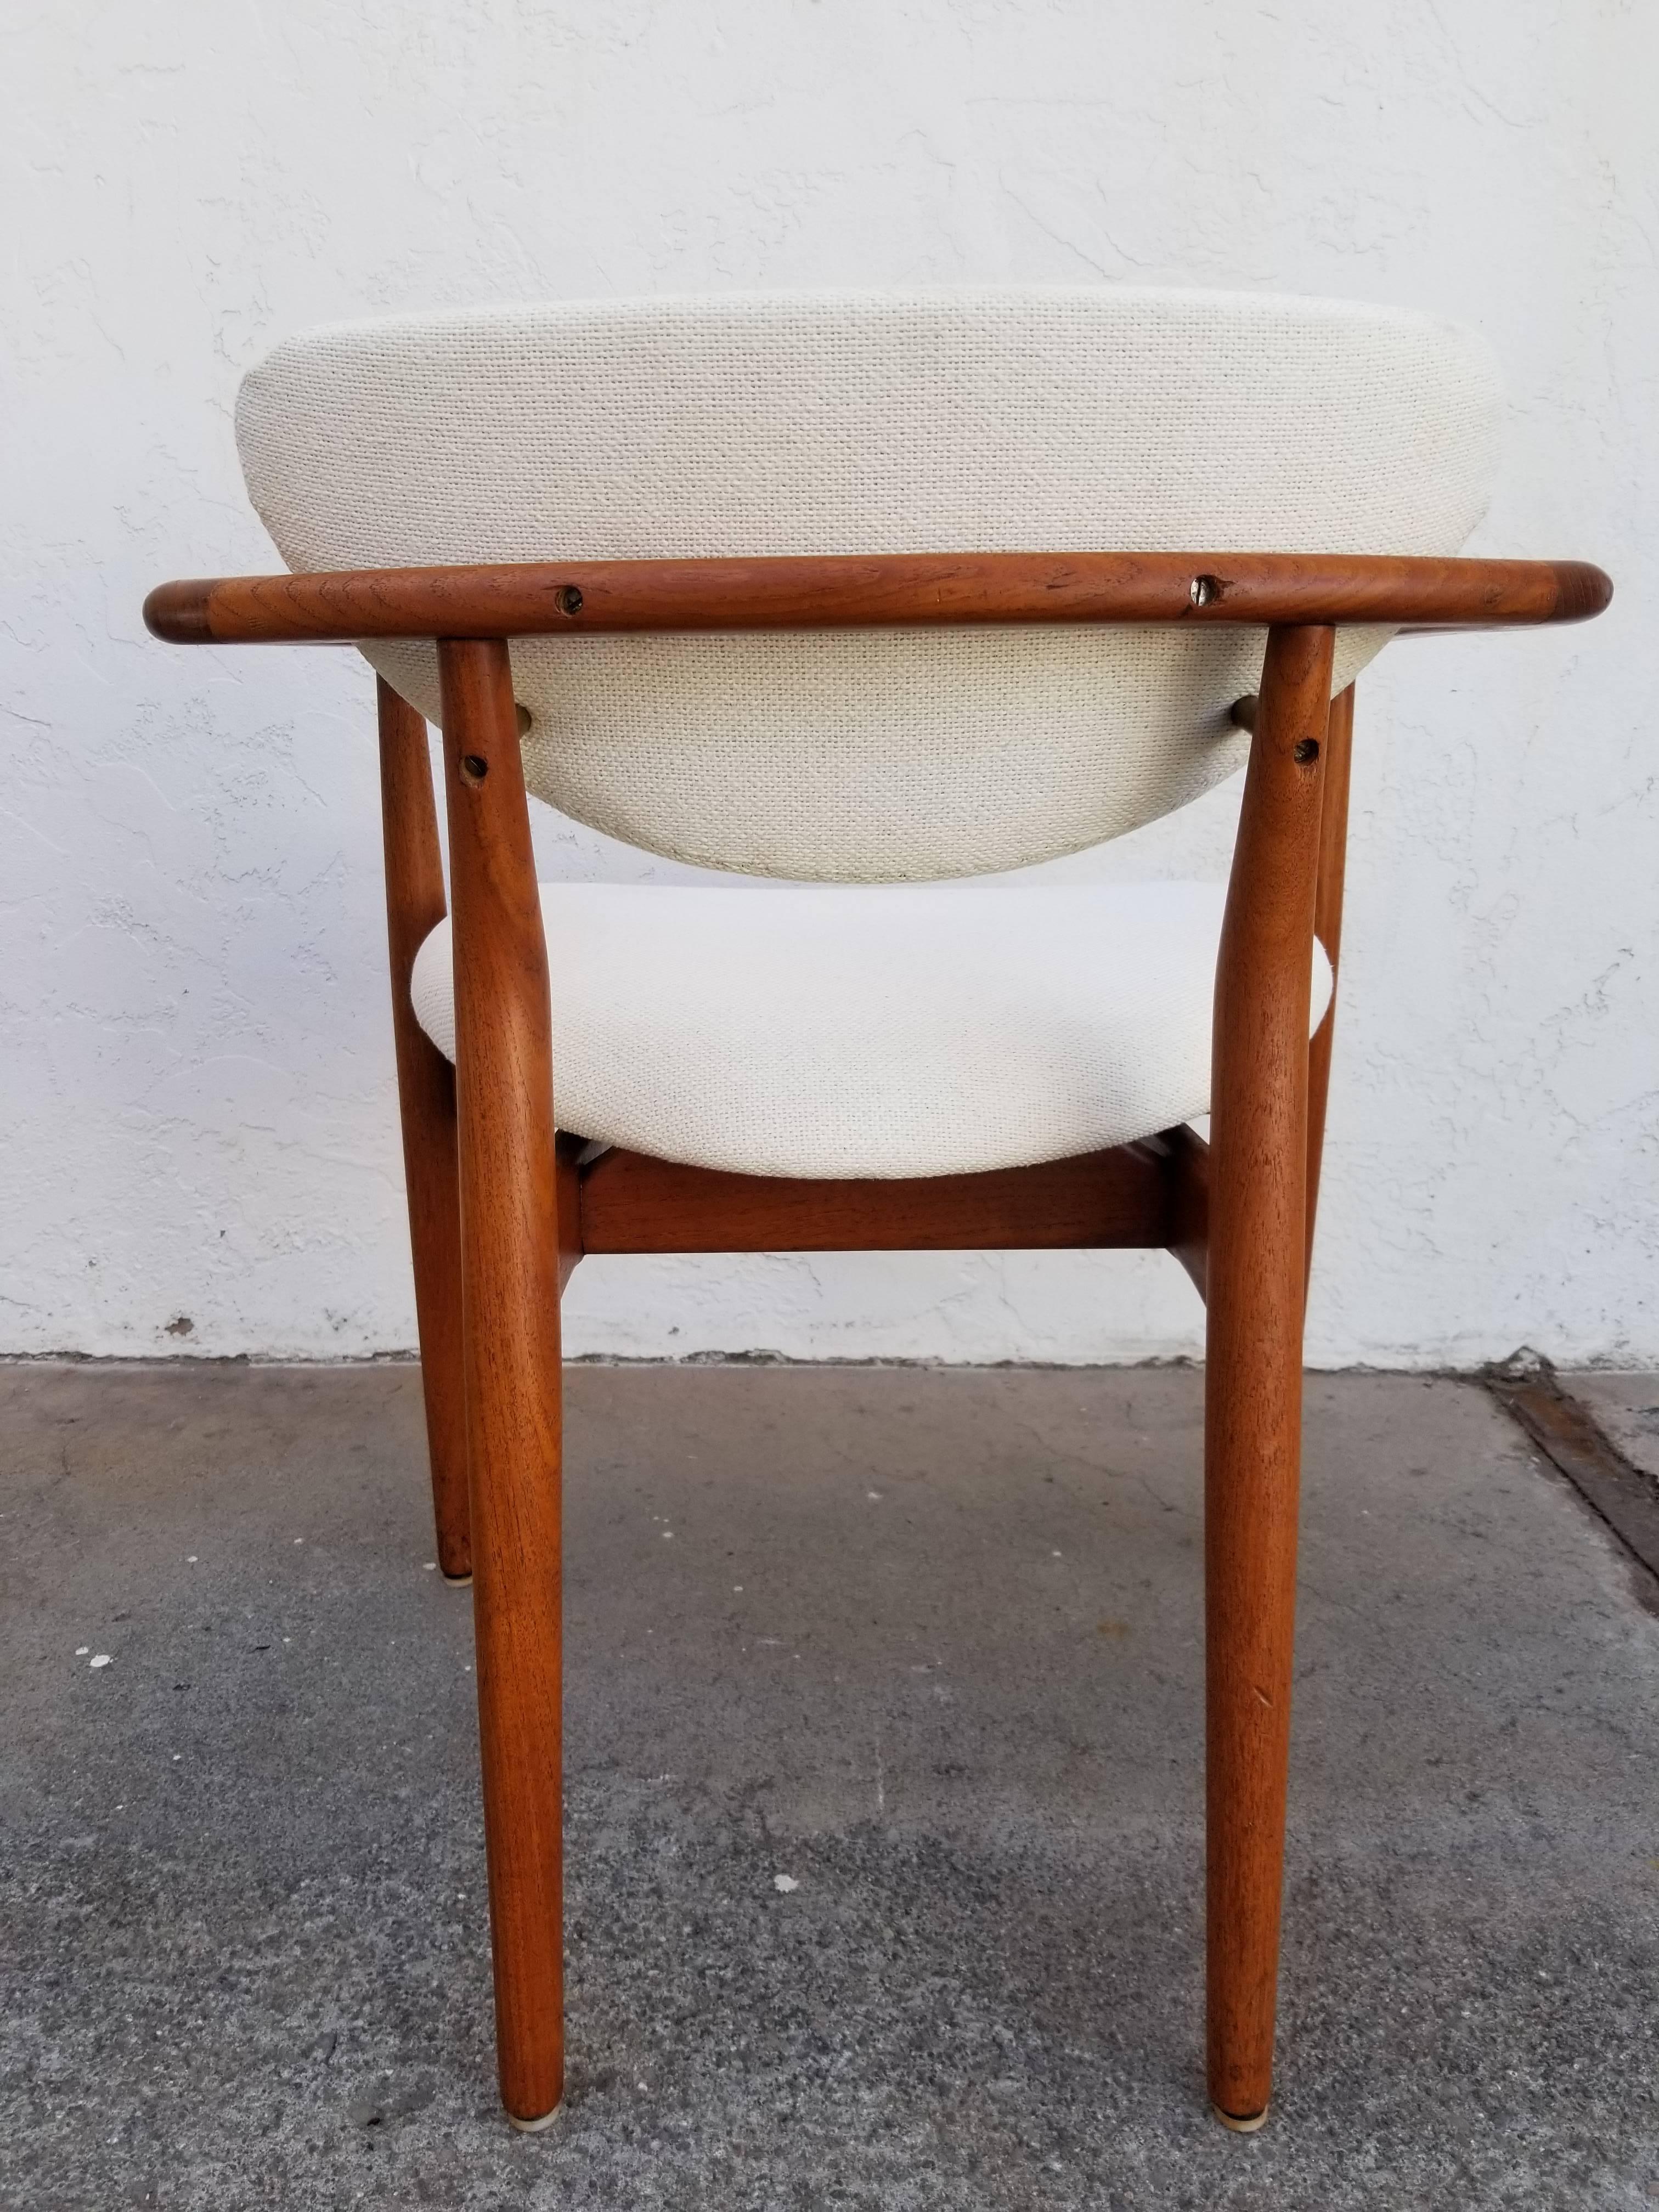 1950s teak Danish Modern armchair attributed to Finn Juhl. Graceful, sculptural design, floating seat. All indications of design, material and fittings identical to Finn Juhl, but no markings or labels on this chair.